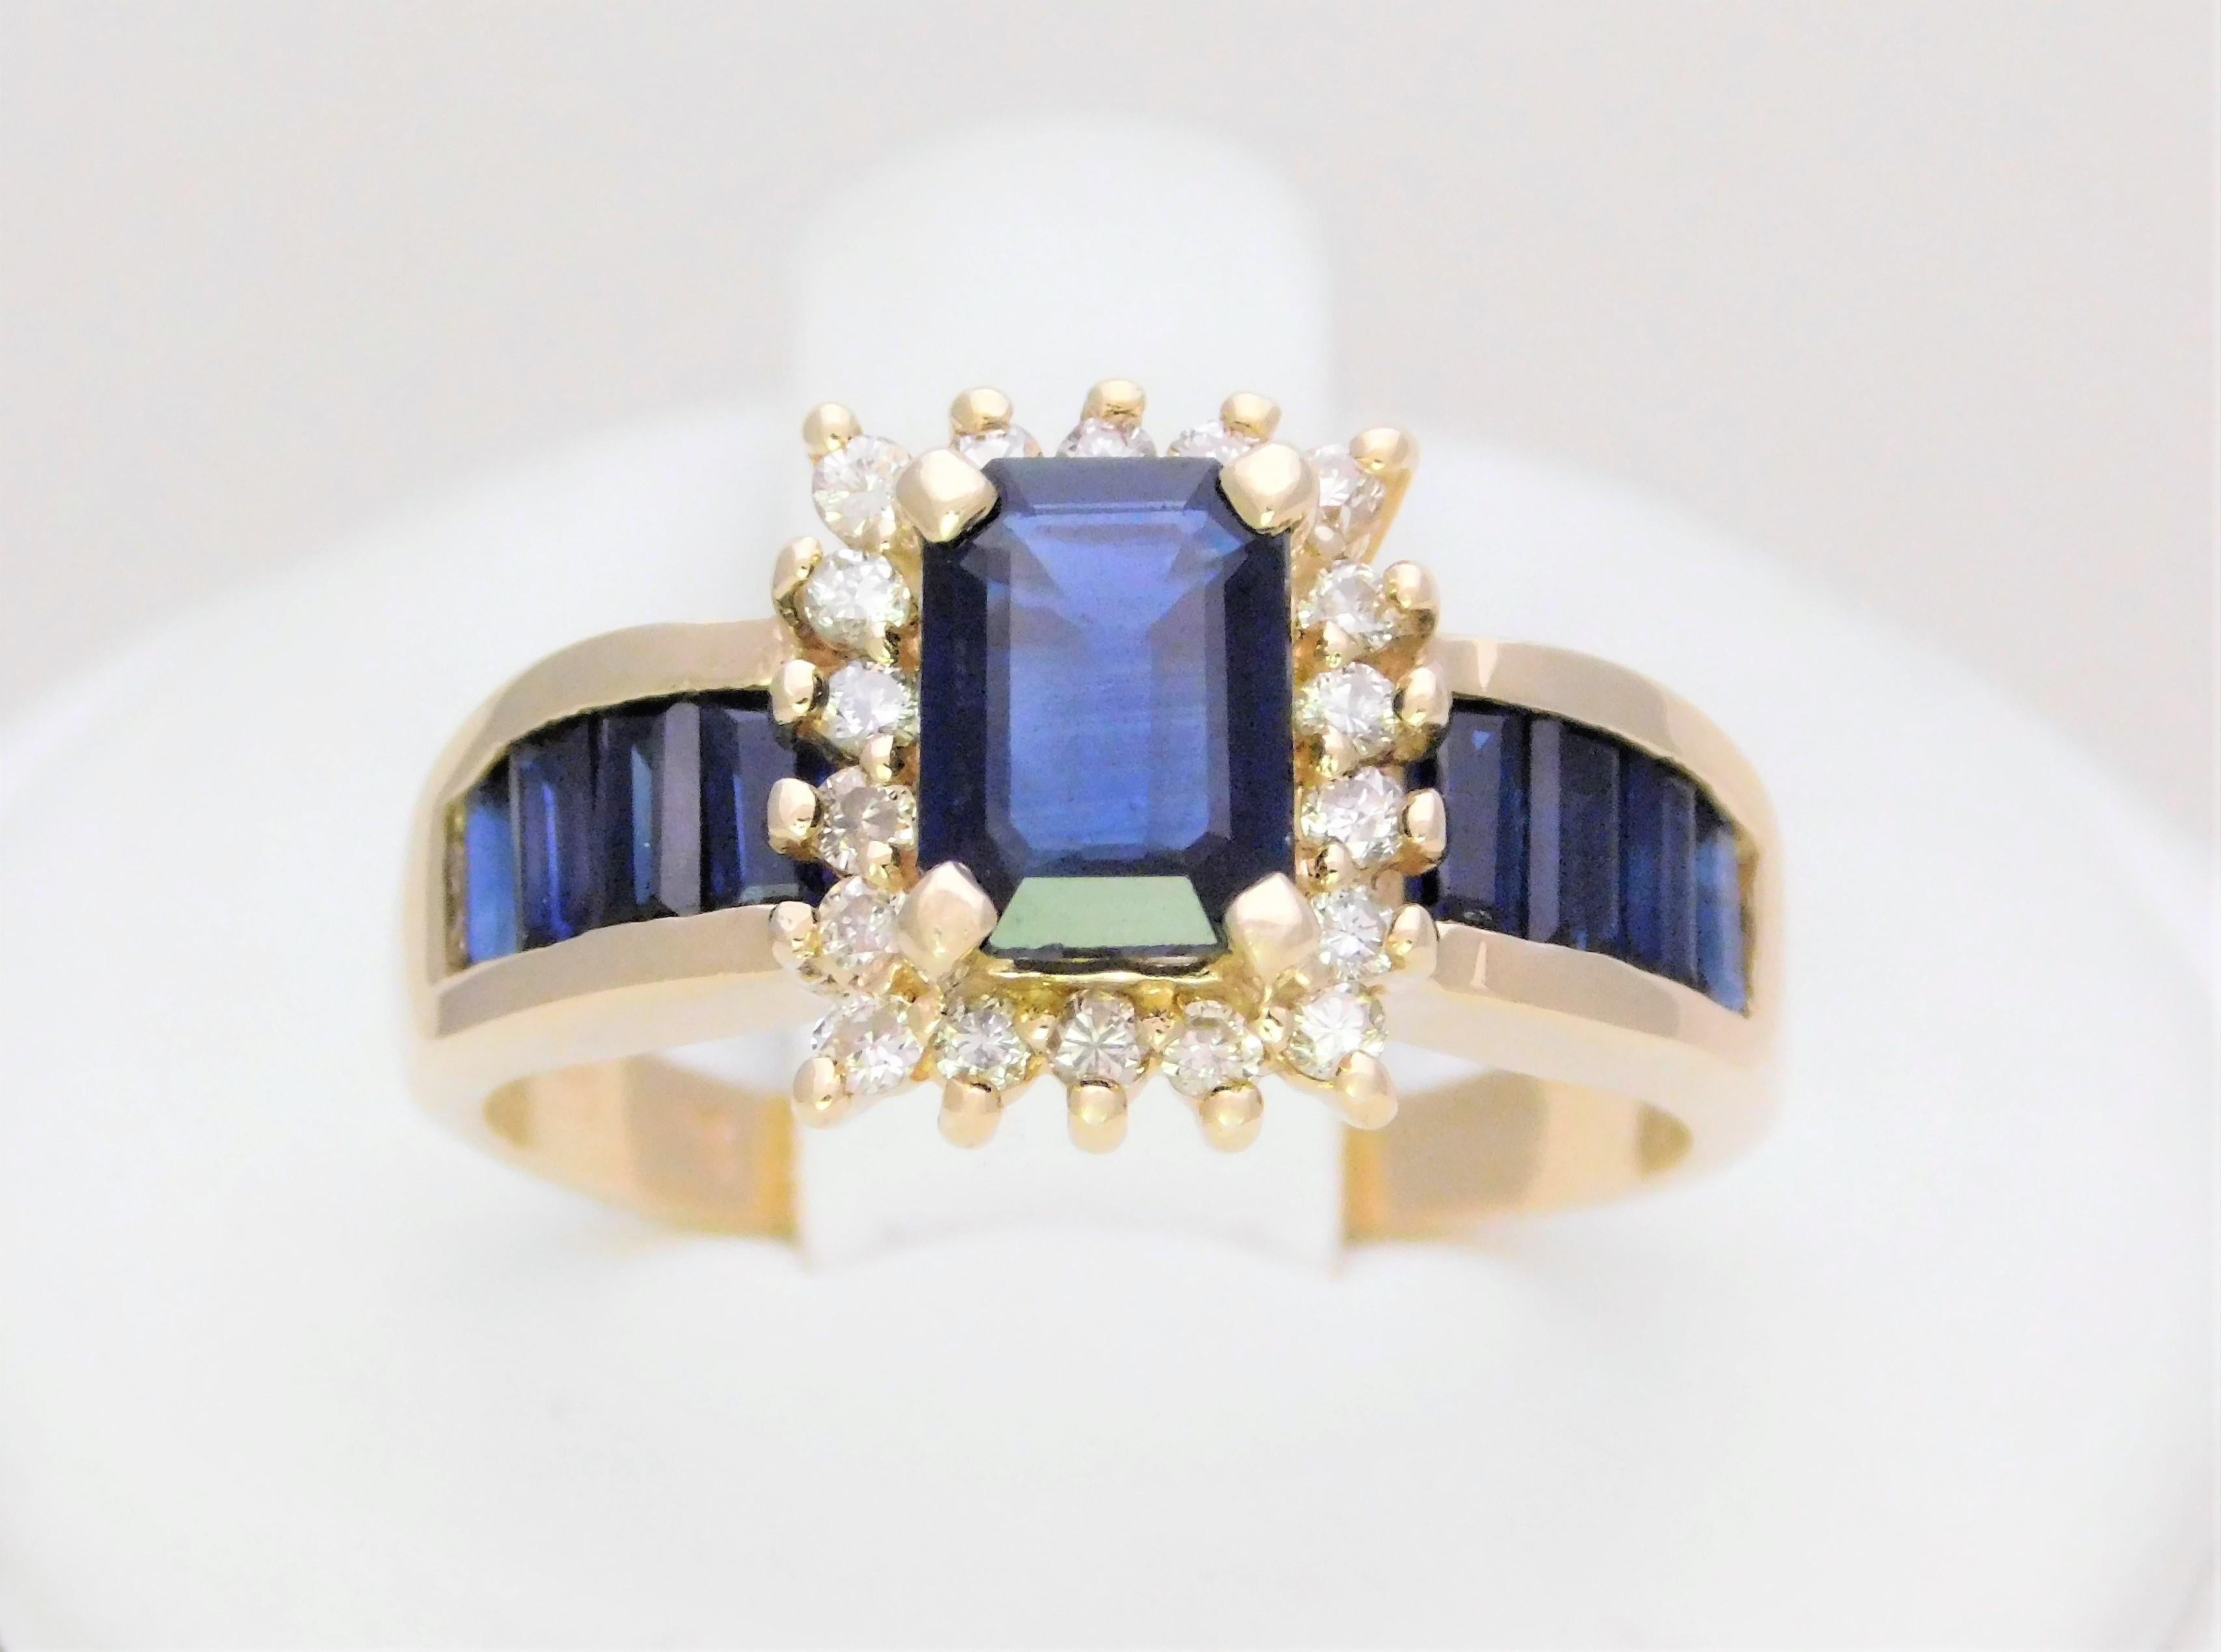 Mid Century 2.25ct Blue Sapphire and Diamond Cocktail Ring

Birthstone of September.  Sapphires deep blue and sparkling hue has long been loved and revered by ancient and modern cultures. It has come to be a loved gemstone that is second in